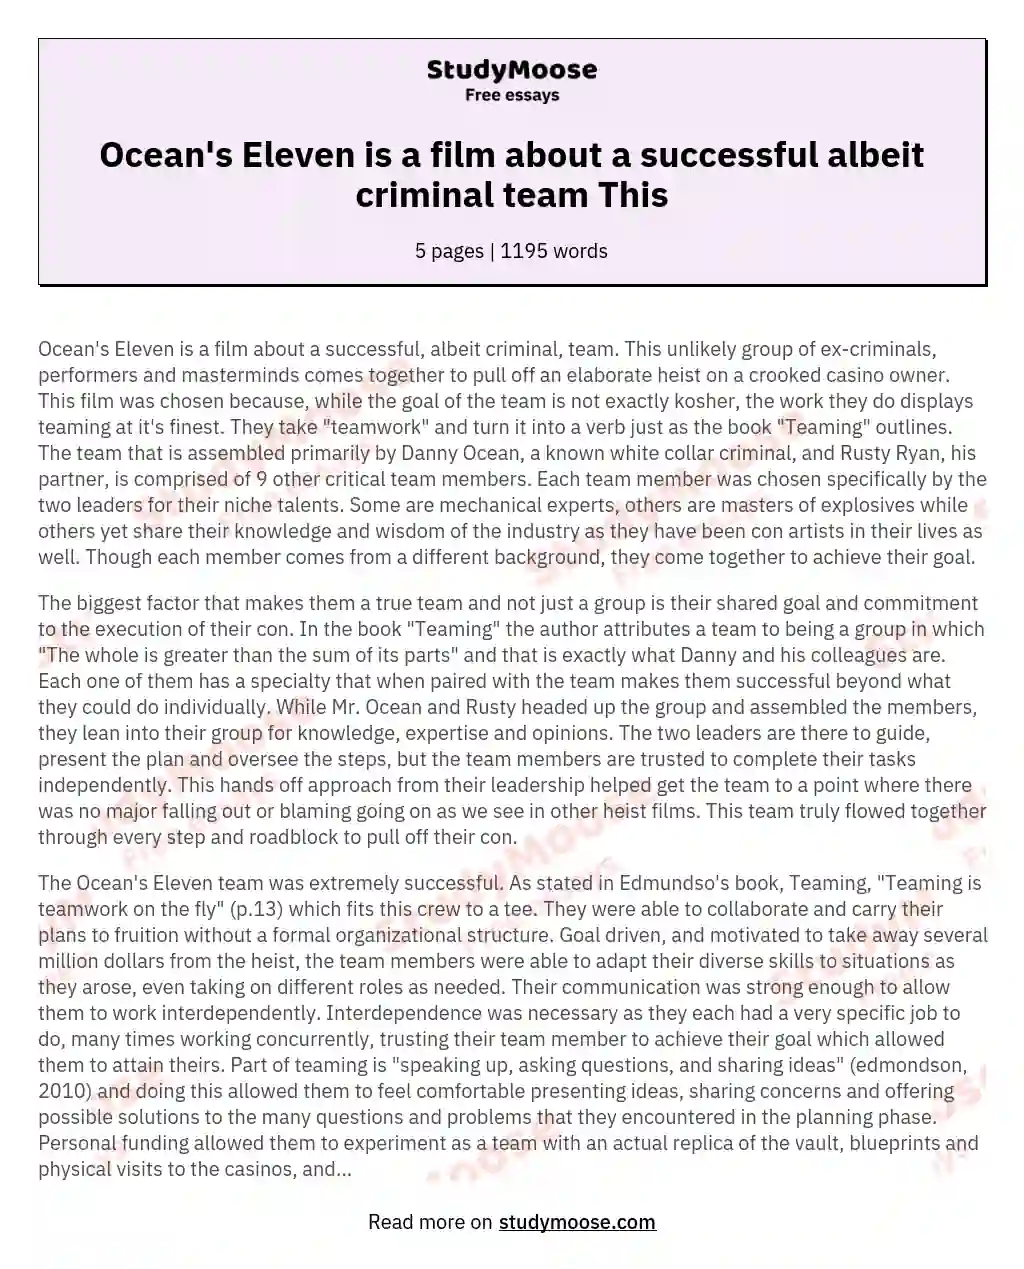 Ocean's Eleven is a film about a successful albeit criminal team This essay